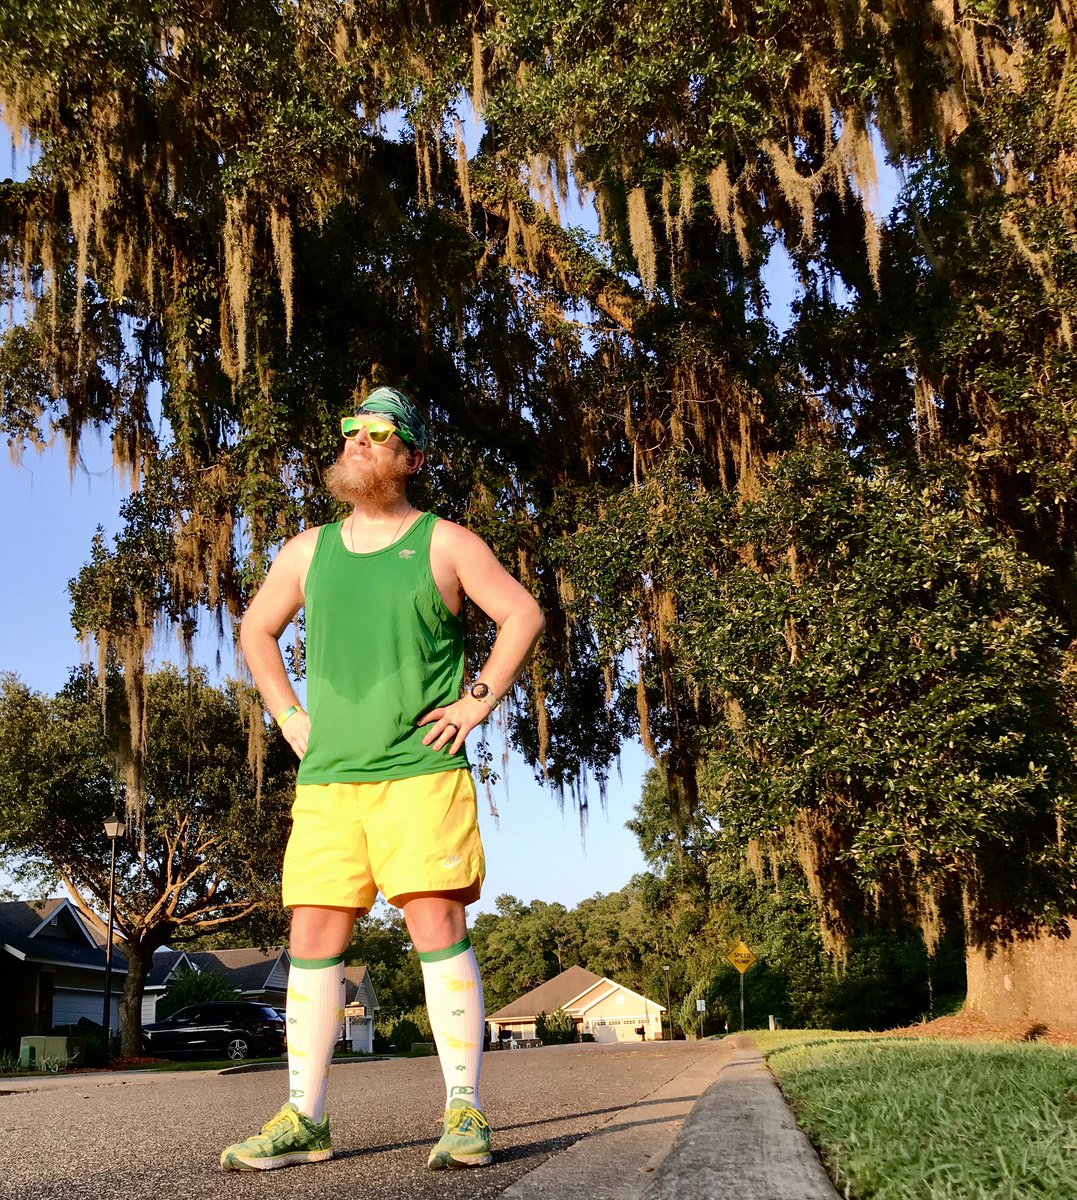 When life gives you lemons, make a run fit.

I’m sure that’s how it goes.

4 miles. 🍋

#IStandWithYou #Fitness #teamnuun #HSHive #PROAlumni #SquirrelsNutButter #TeamROADiD #TeamULTRA #JoyWins #ULTRAJoy #BeatYesterday #LeagueOfGarmin #RunChat #WeRunSocial #IHeartTally